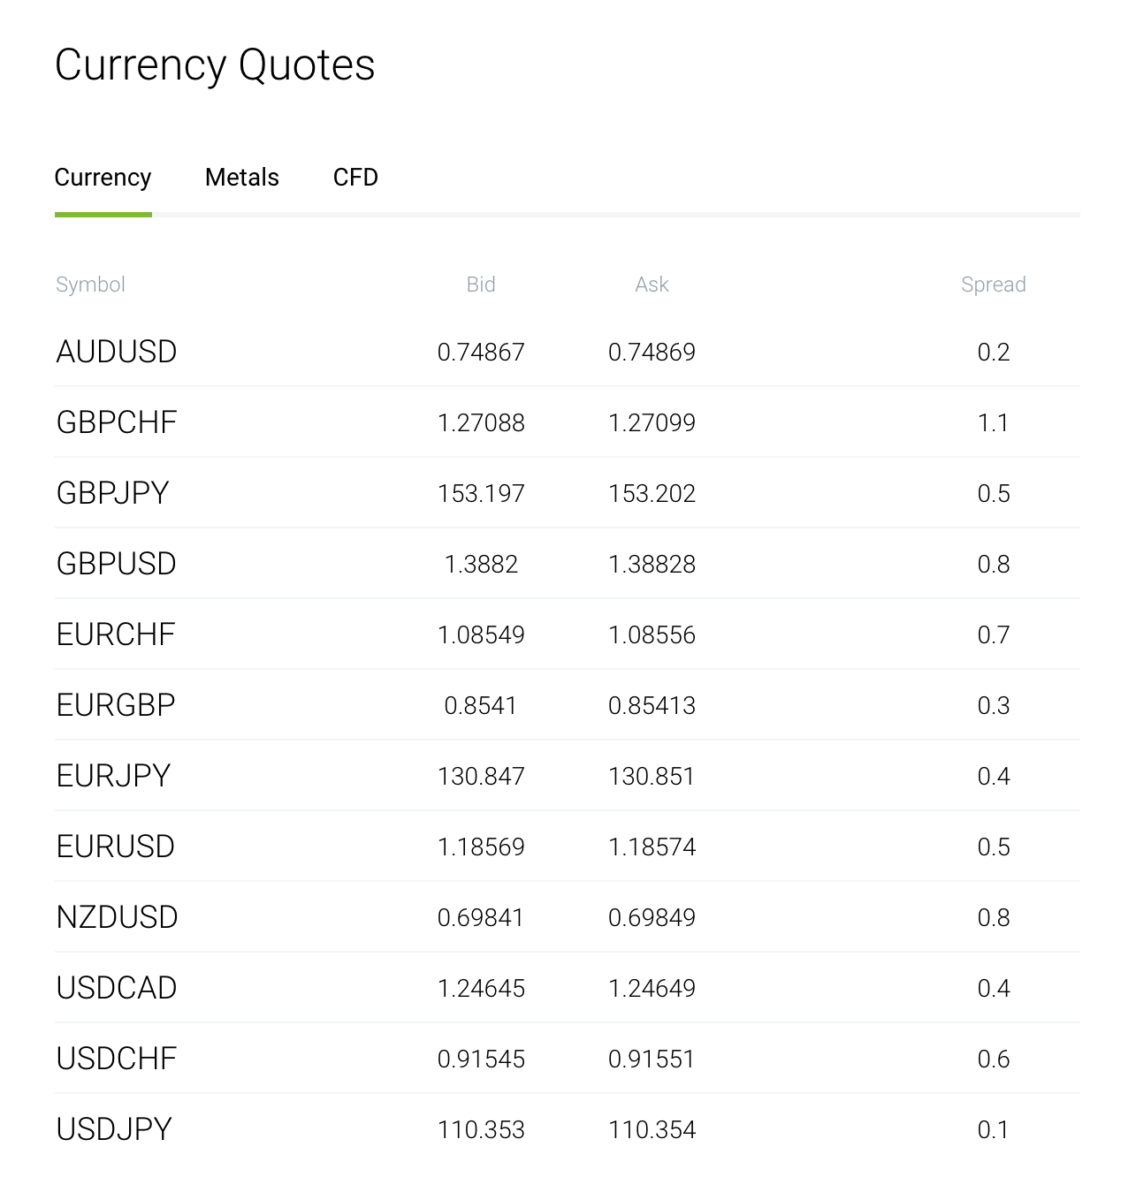 Live forex quotes at RoboMarkets